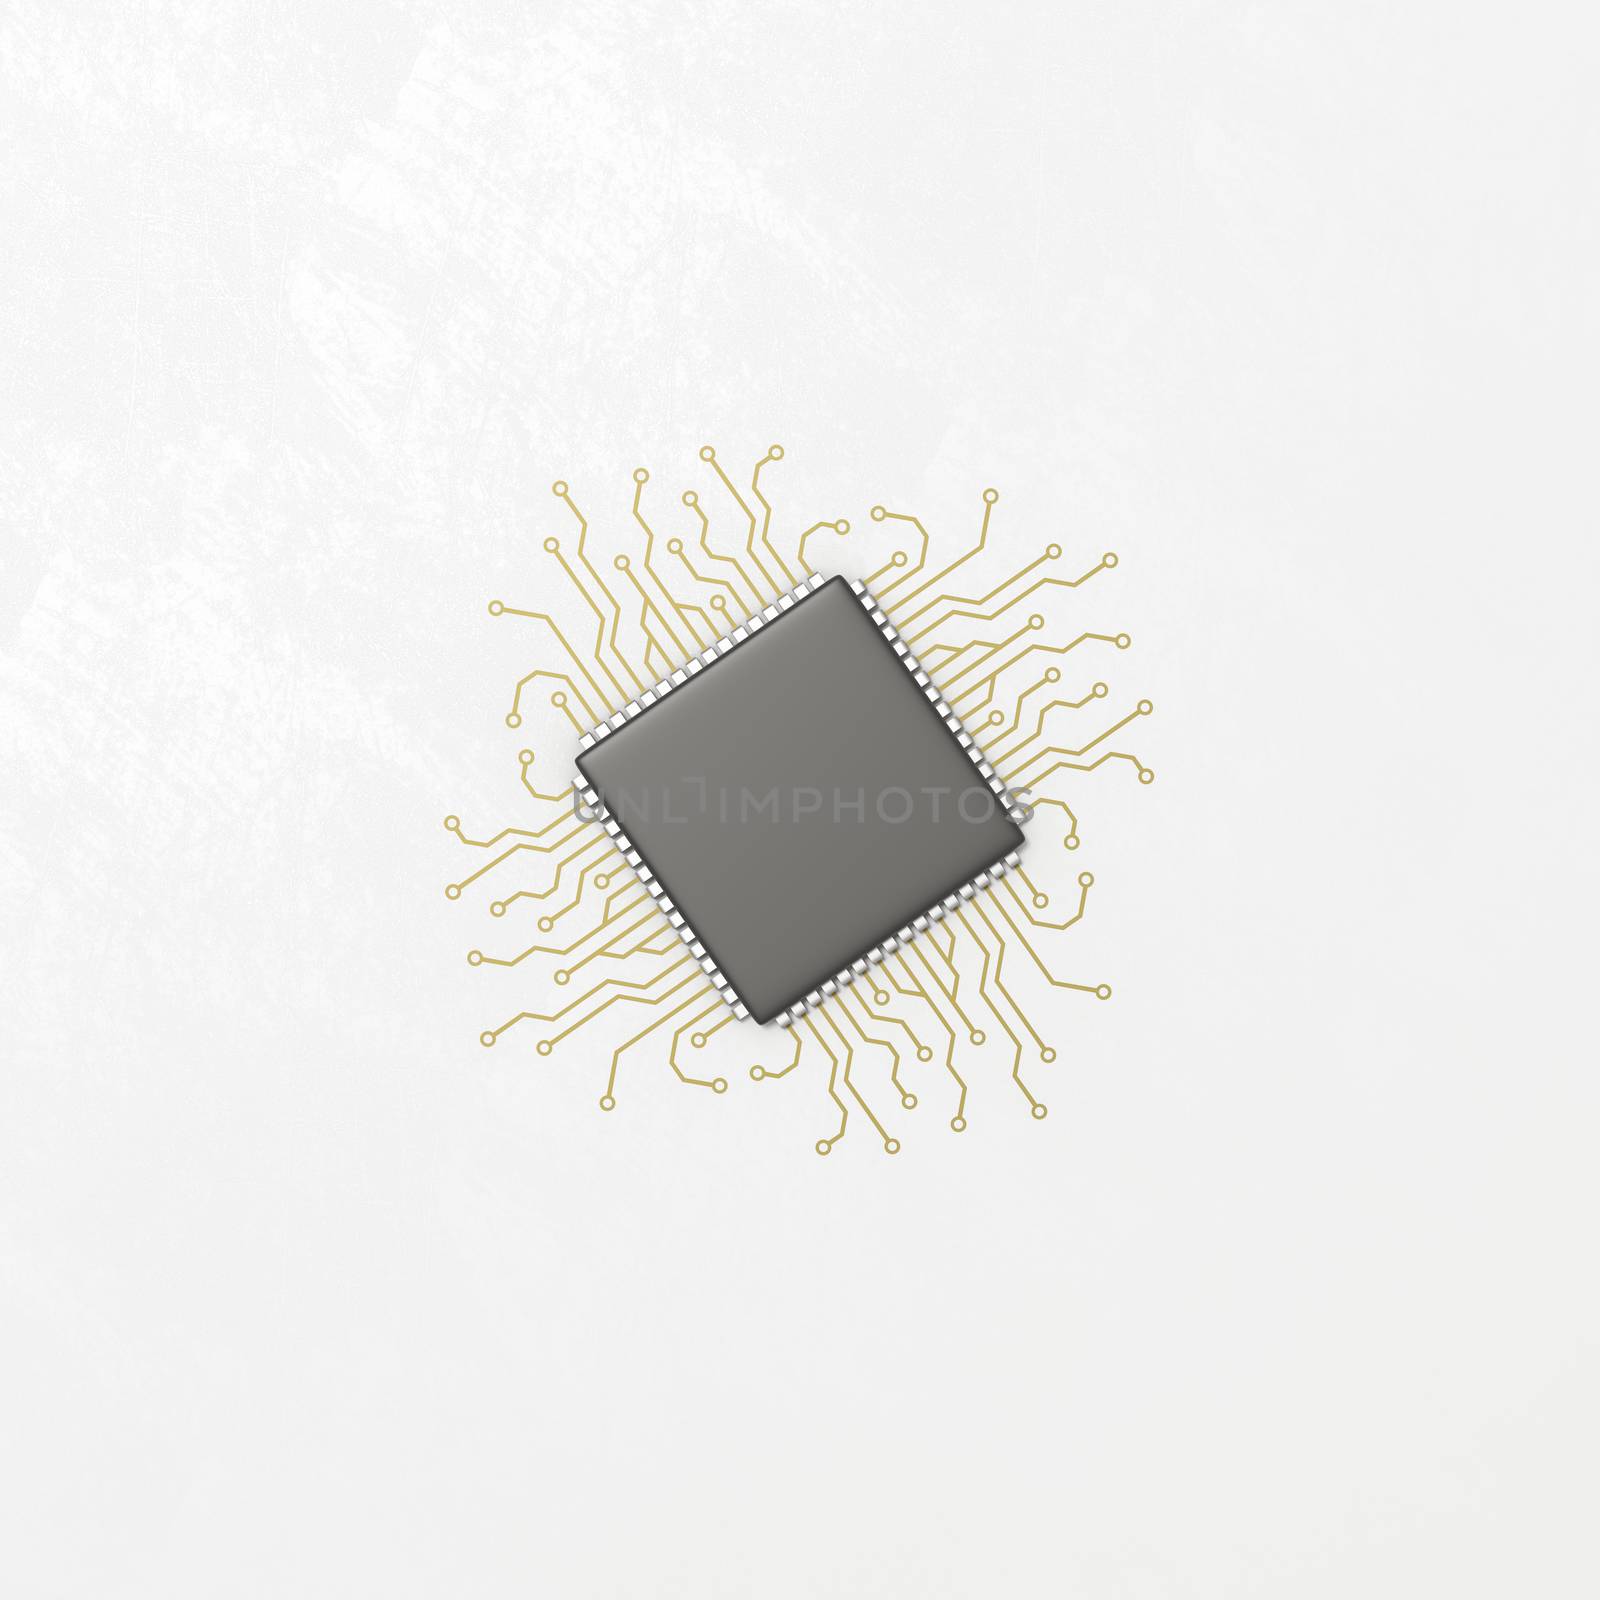 Integrated Circuit with Conductive Traces Illustration by make